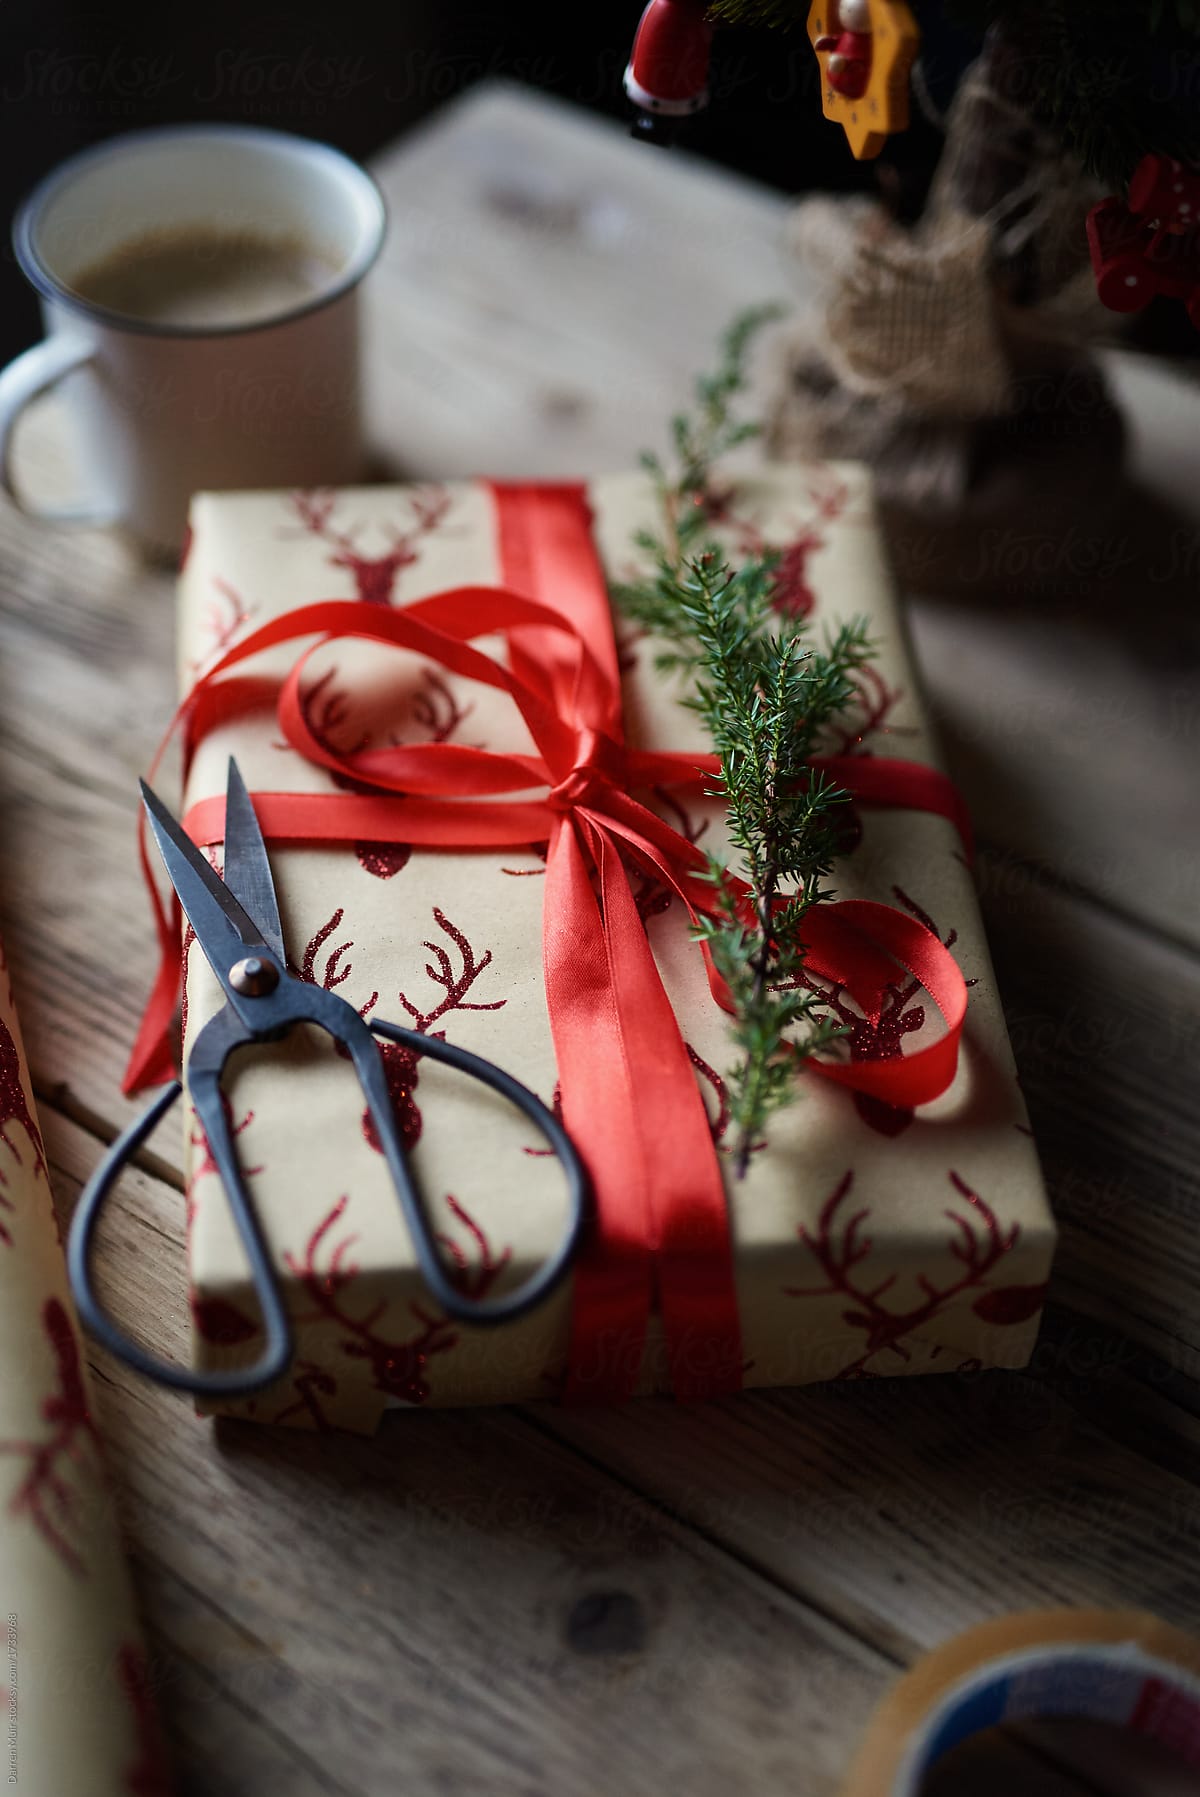 Christmas gift wrapped present in reindeer print brown paper with red bow on wooden table.